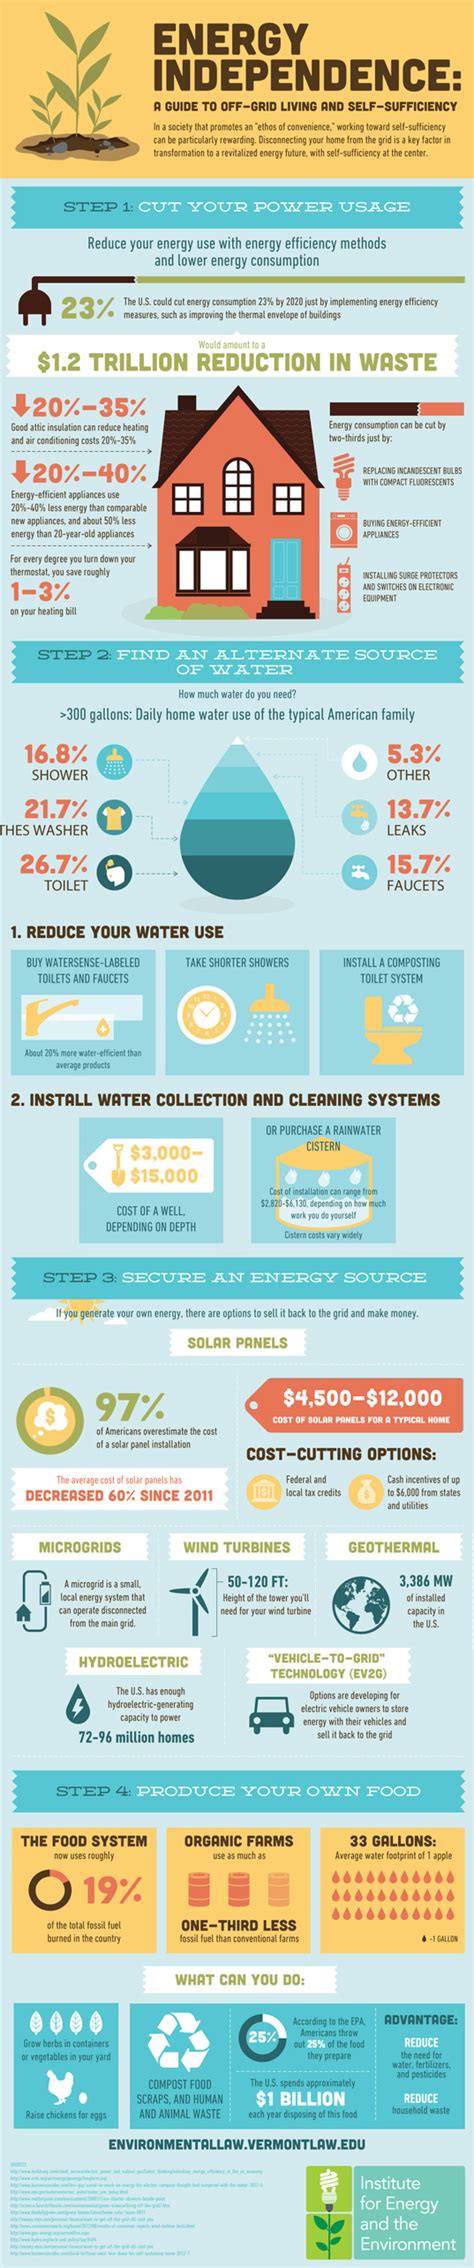 INFOGRAPHIC: How to Achieve Energy Independence Through ...